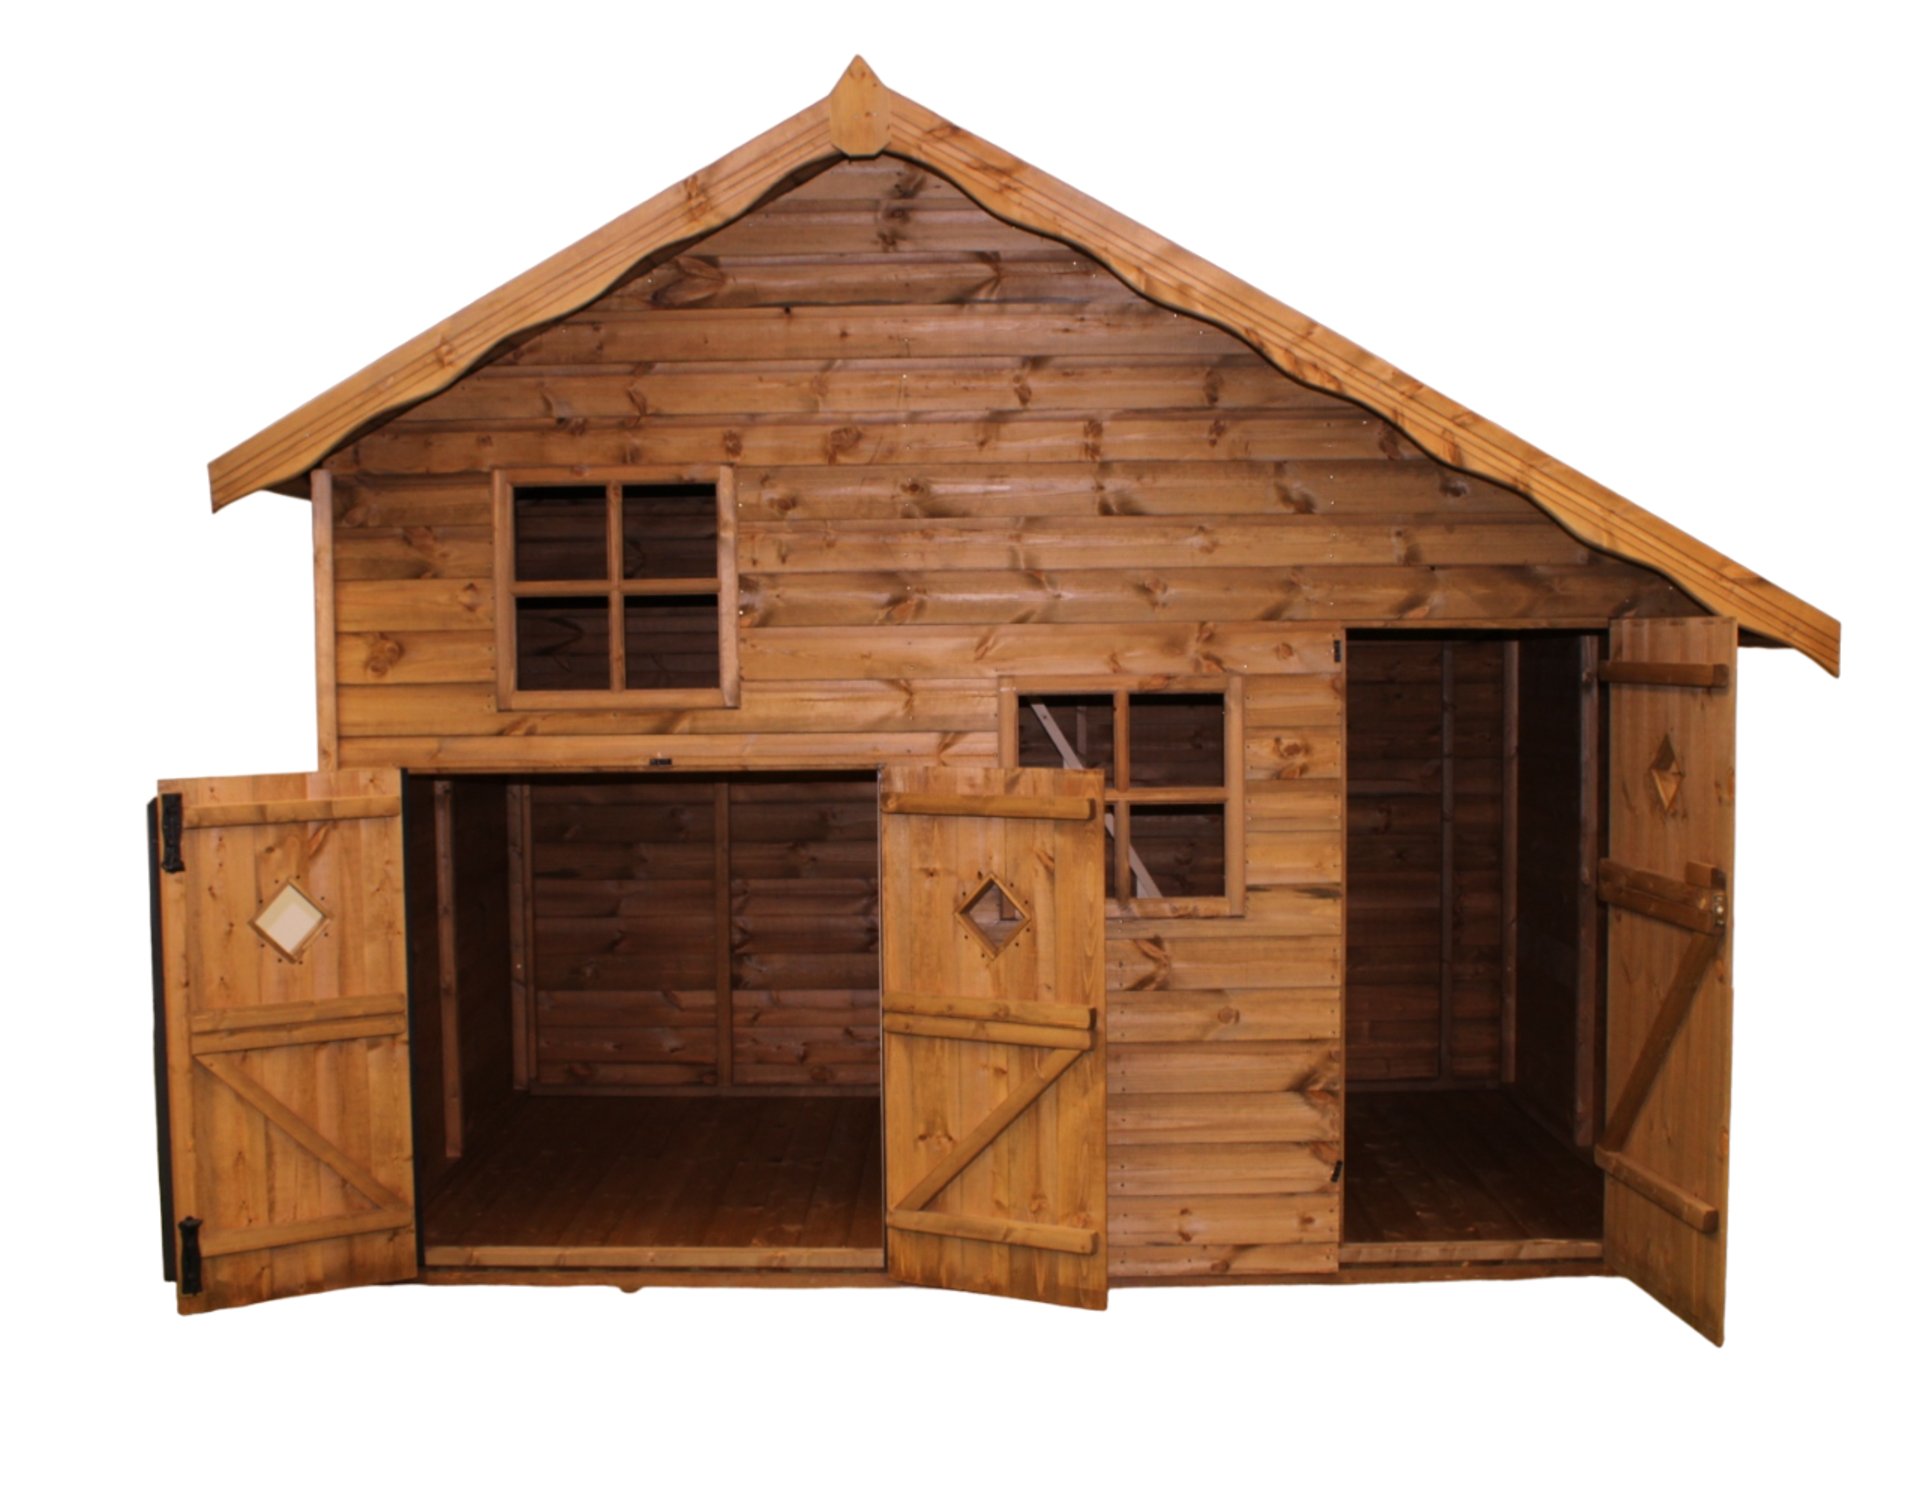 16 6/19 6x10 BRAND NEW kids playhouse shed, Standard 16mm Nominal Cladding £ 2,880 - Image 4 of 9